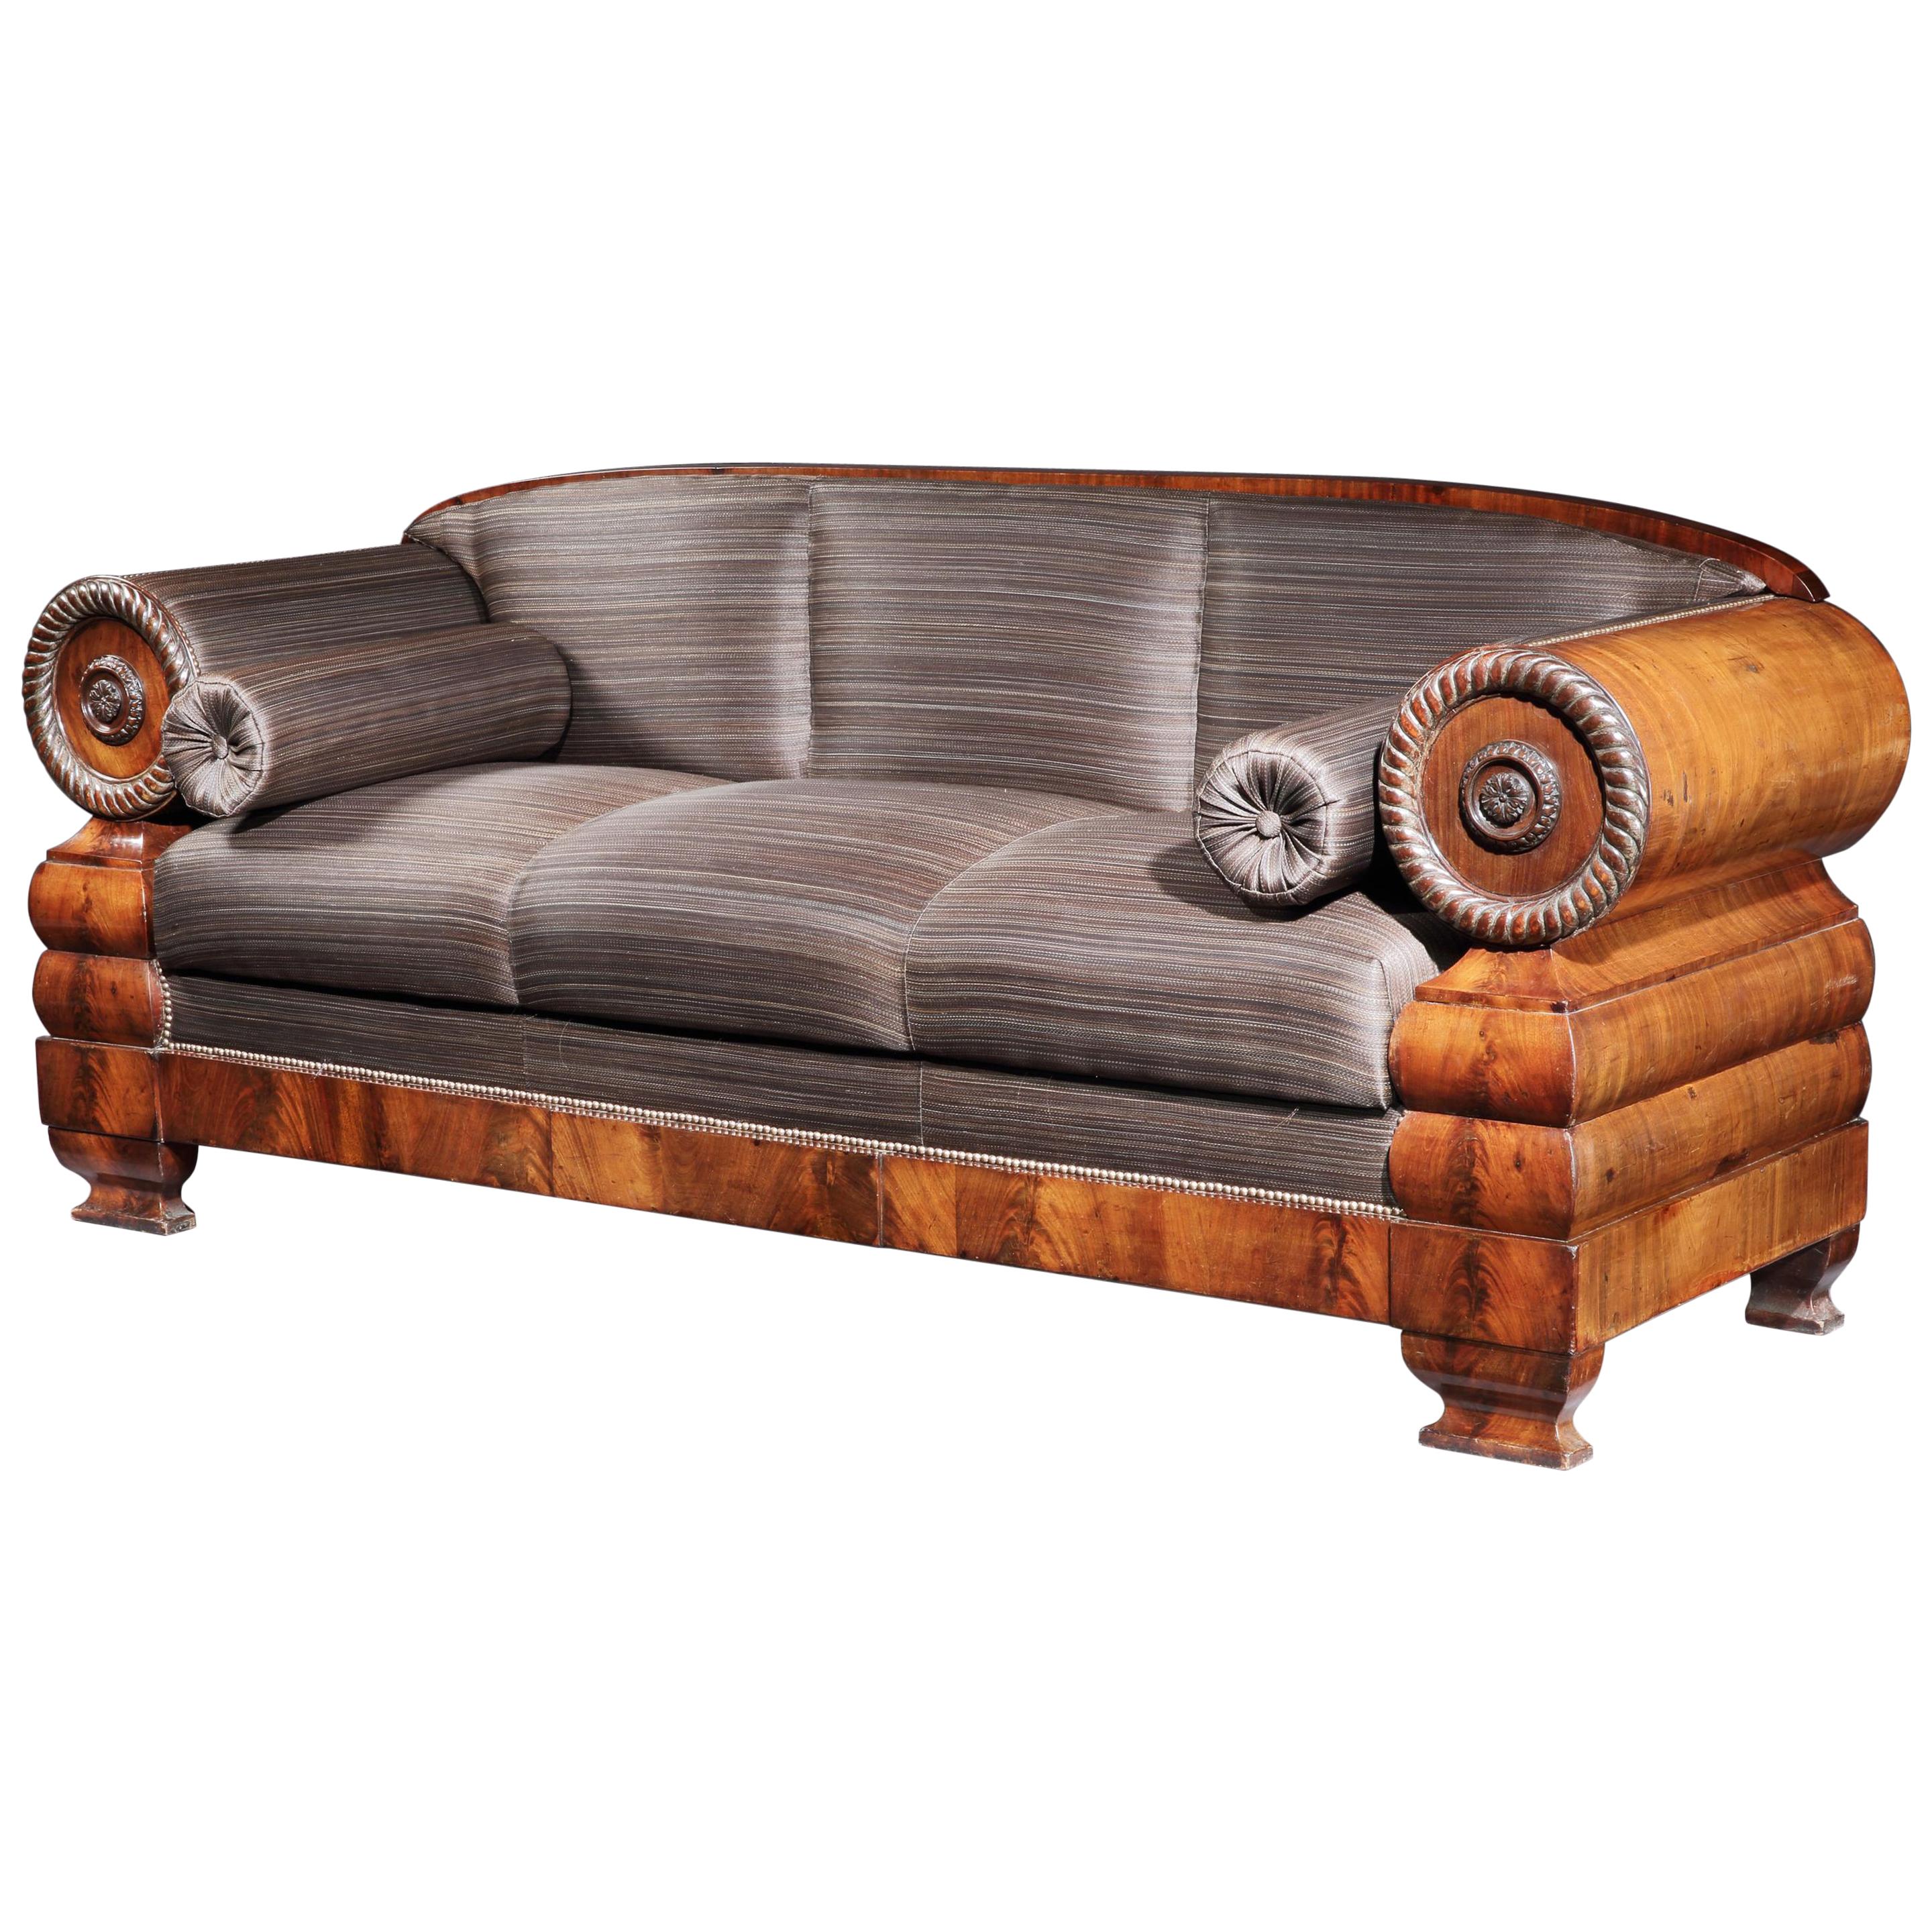 Settee 3-Seat Early 19th Century French Empire Mahogany Upholstered in Horsehair For Sale